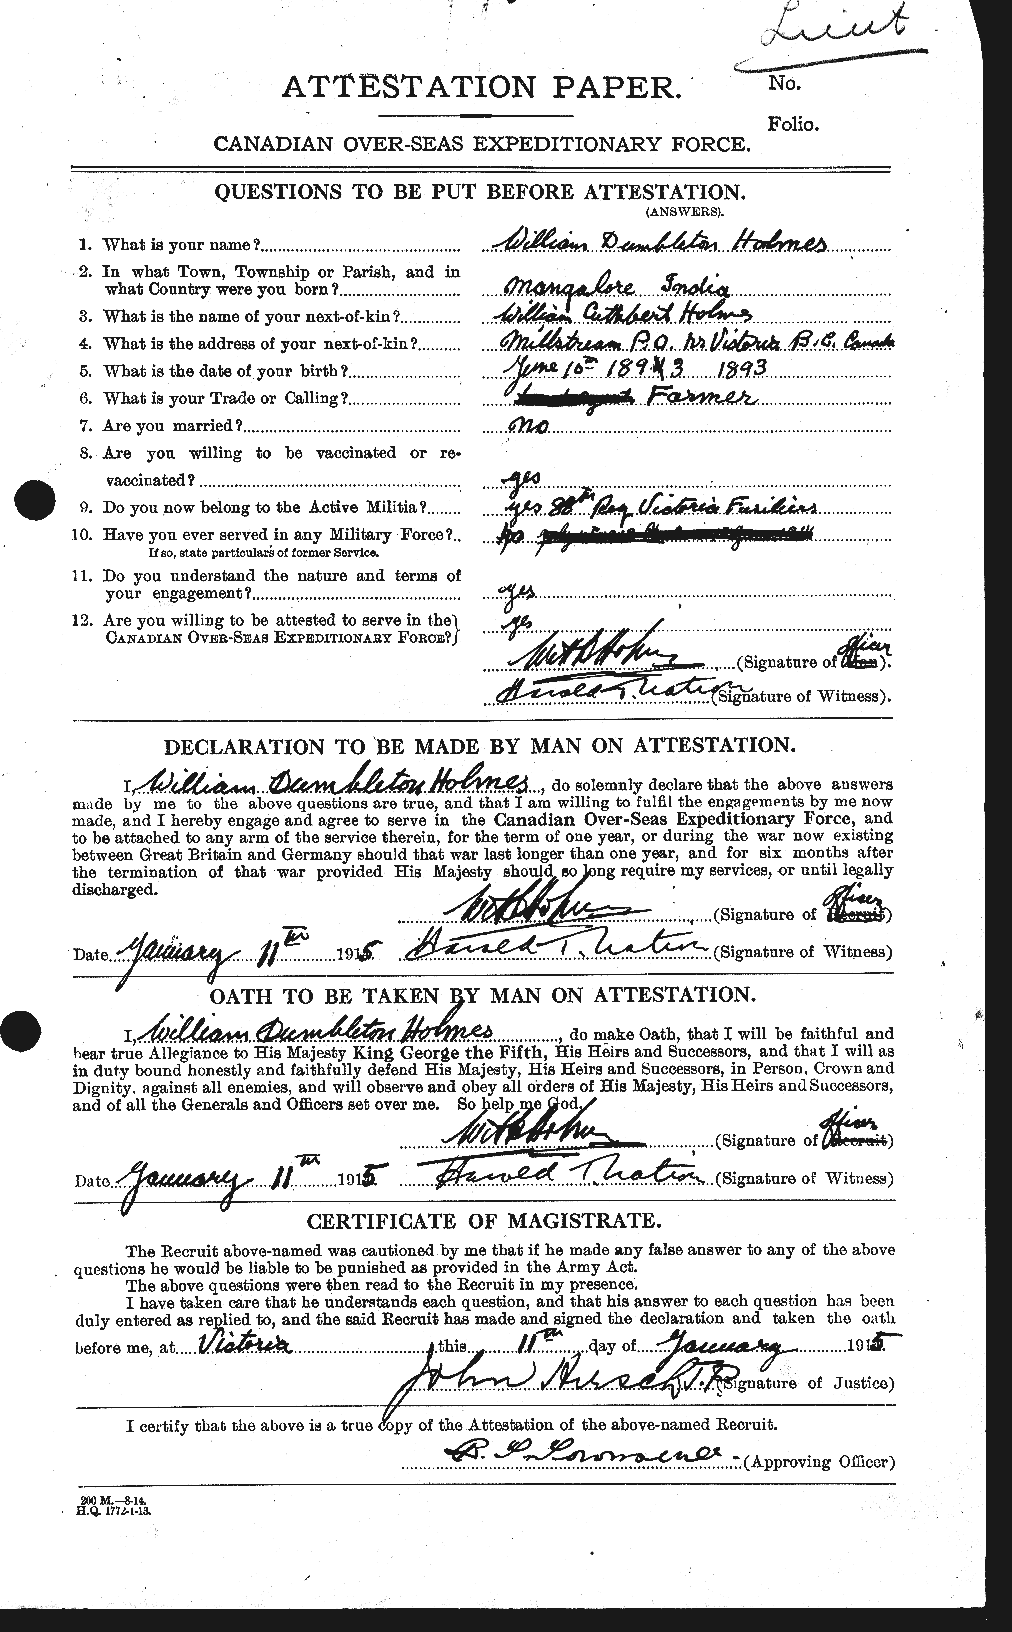 Personnel Records of the First World War - CEF 395764a